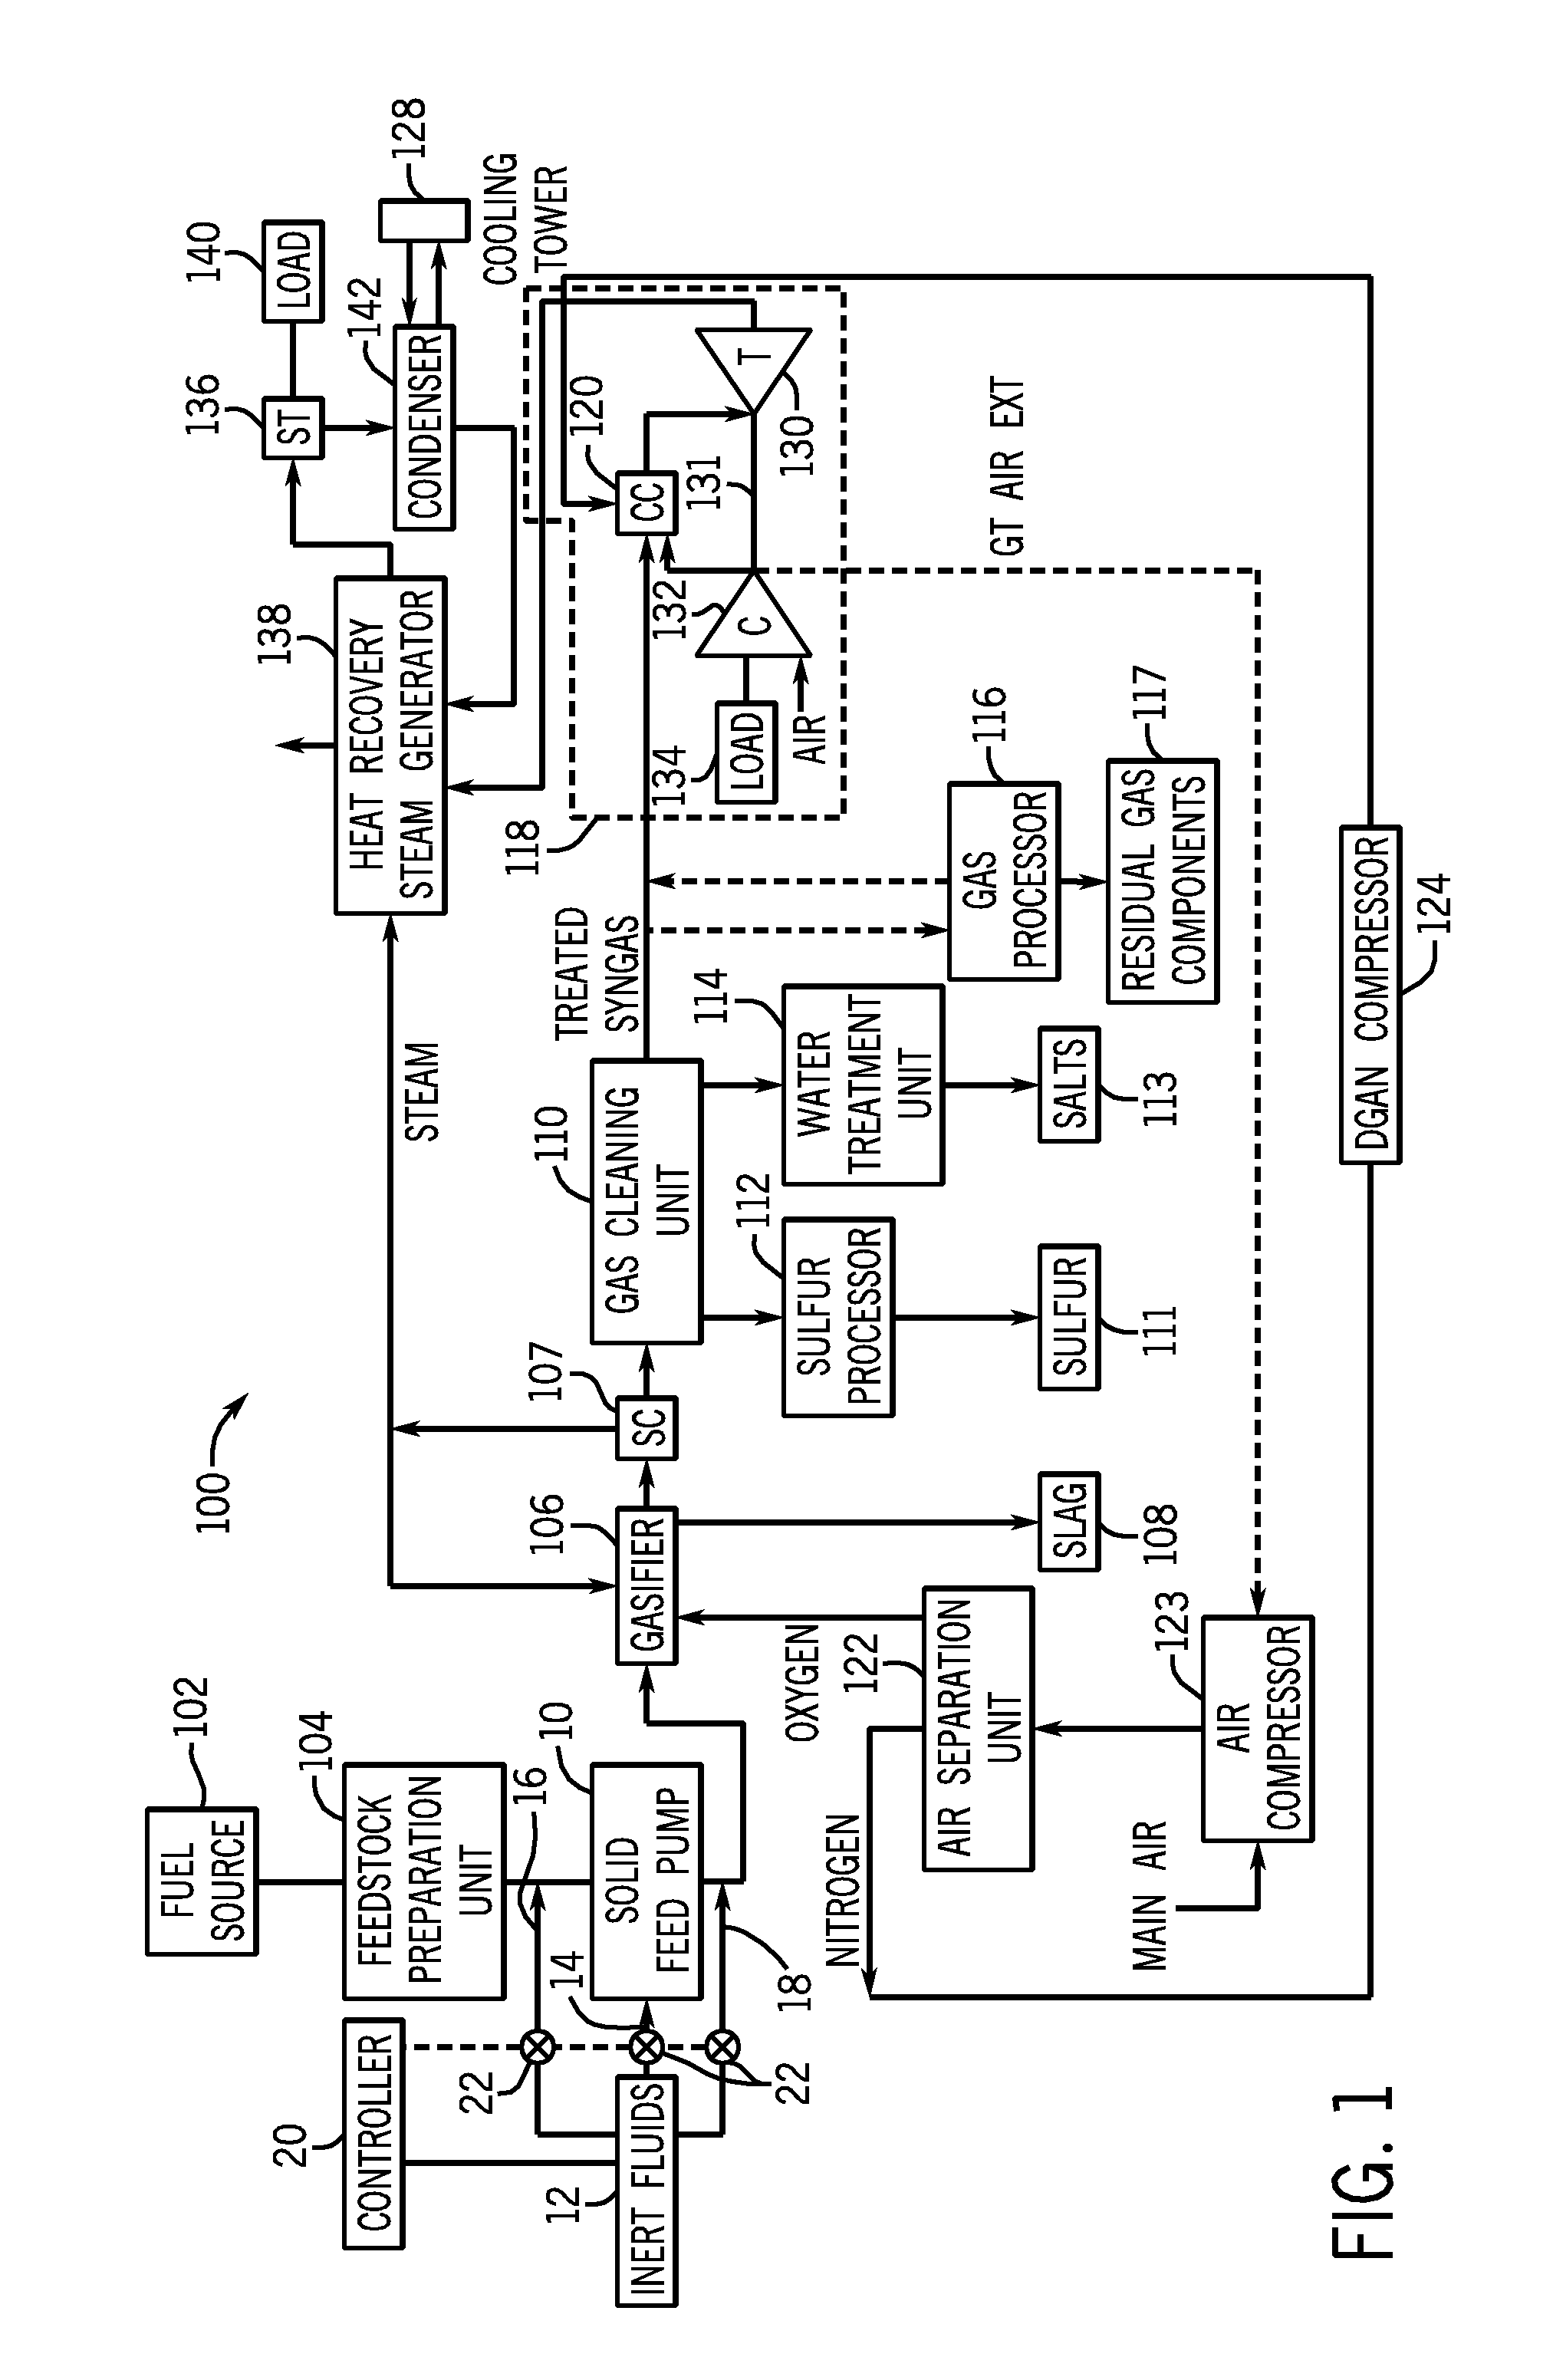 System for thermally controlling a solid feed pump